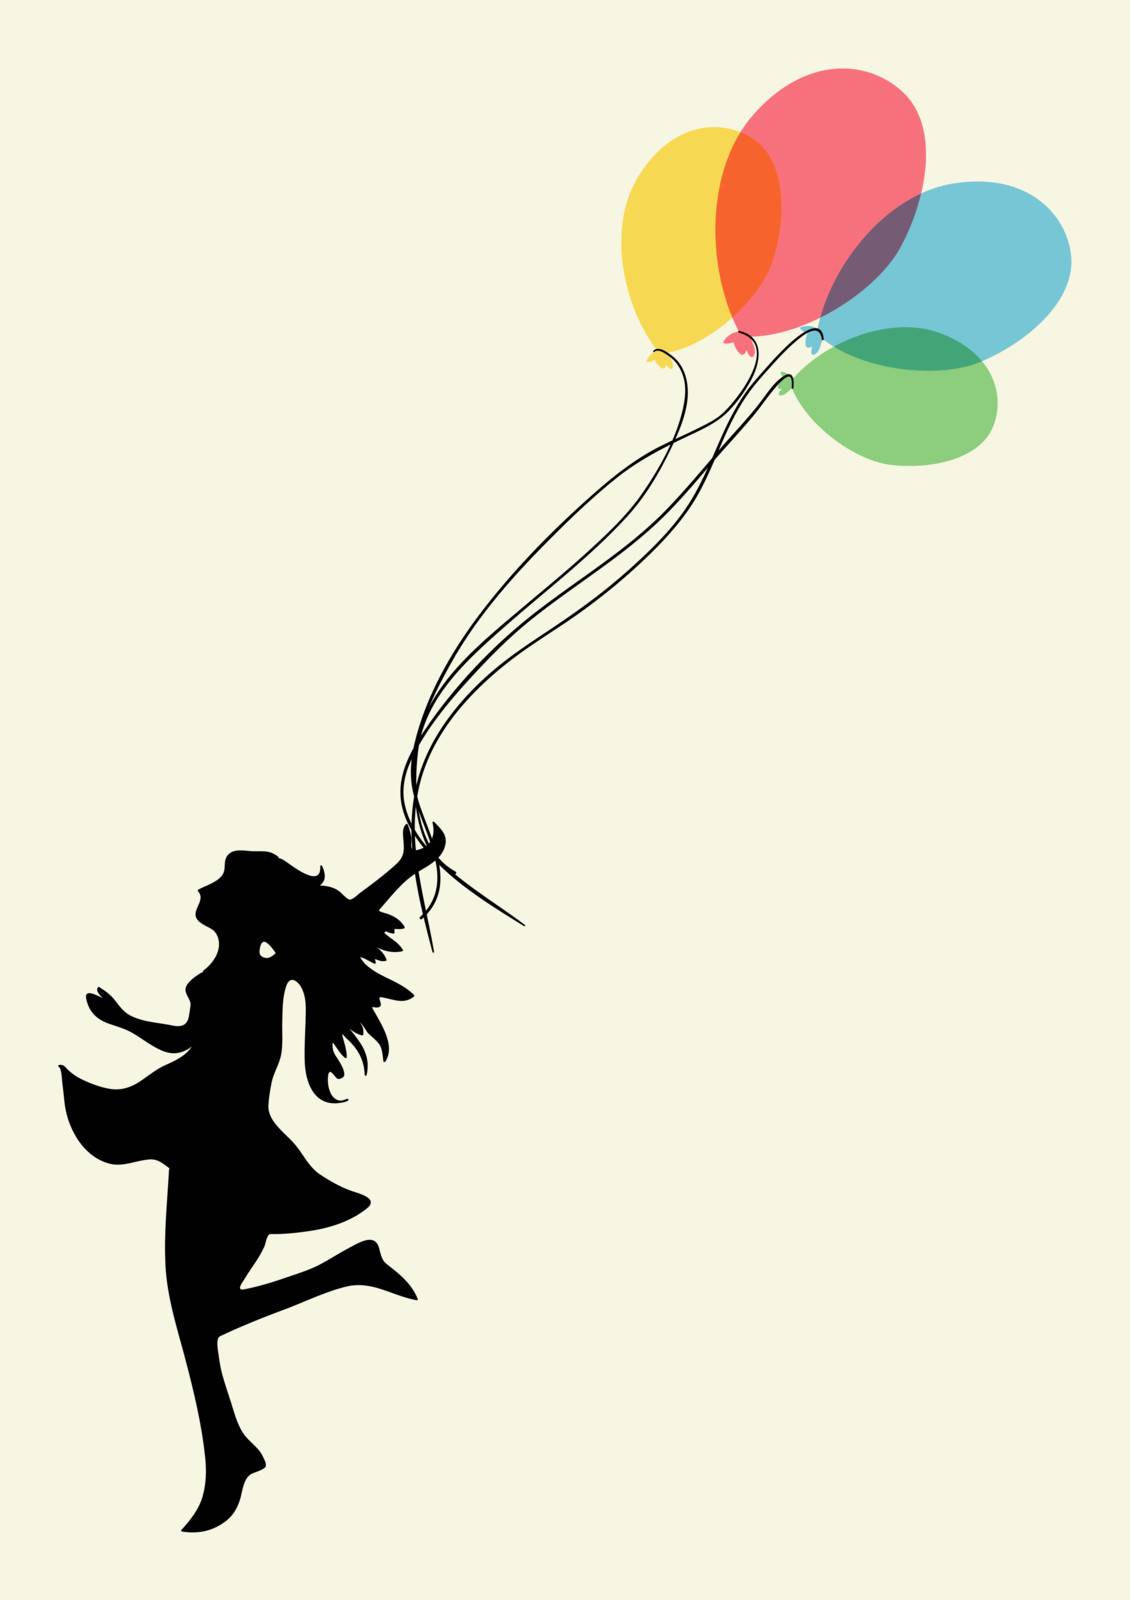 Happy dancing woman with floating balloons. EPS10 file version. This illustration contains transparencies and is layered for easy manipulation and custom coloring